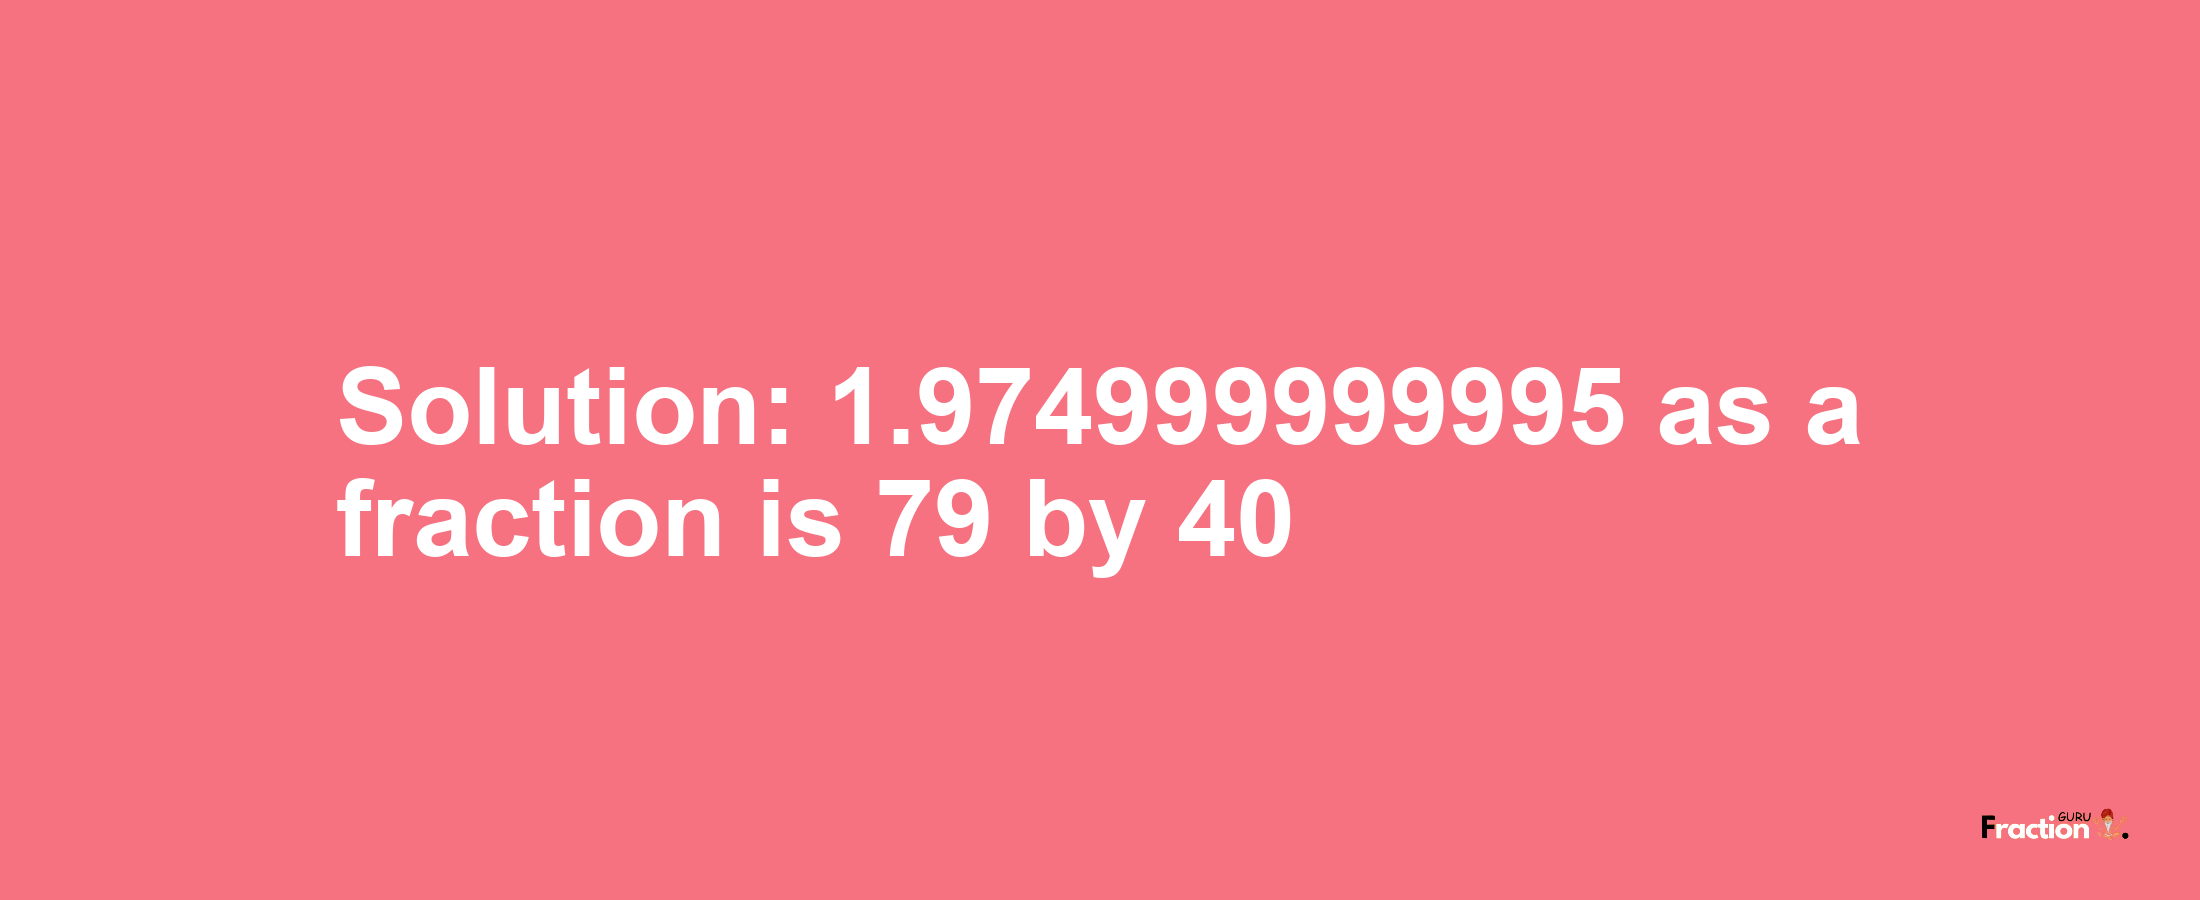 Solution:1.974999999995 as a fraction is 79/40